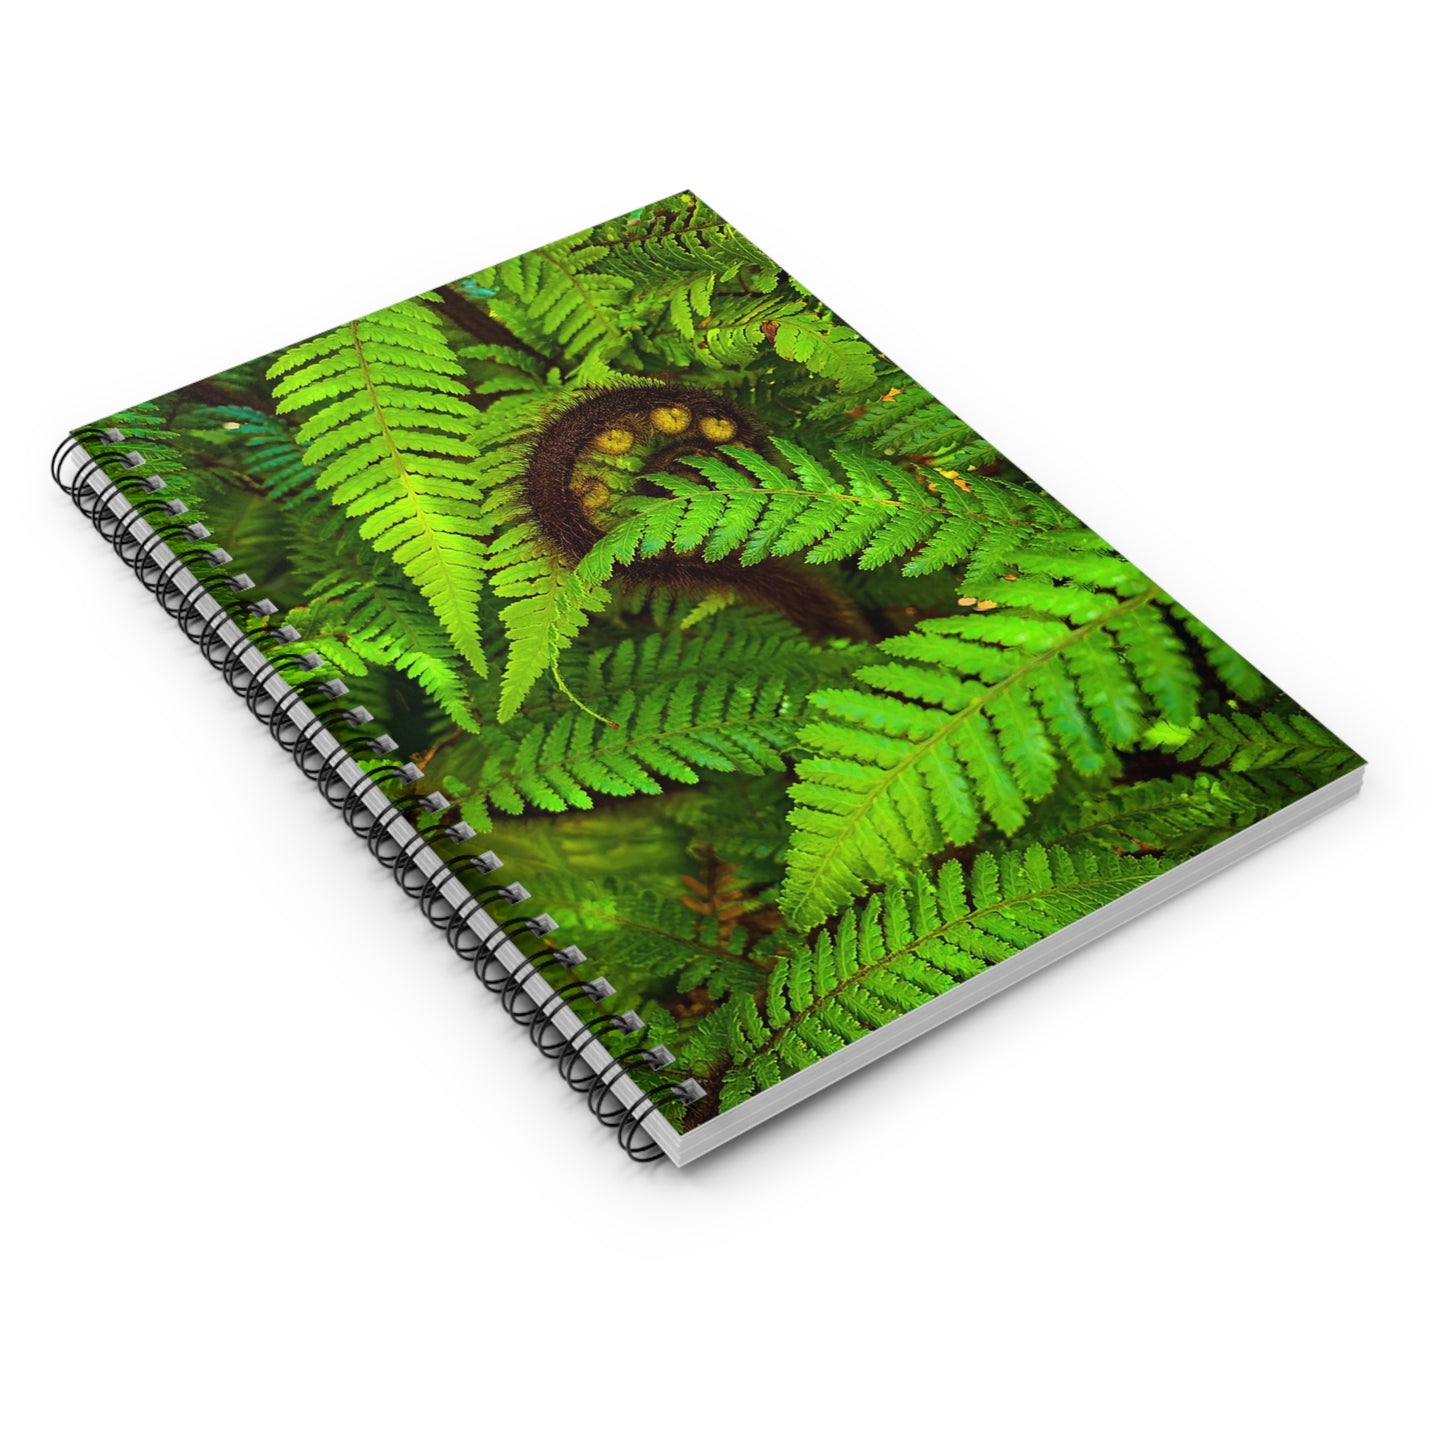 New Zealand Punga Fern Koru Spiral Lined Notebook - Eco-Friendly, 118 Ruled Pages, Perfect for Daily Notes and Journals